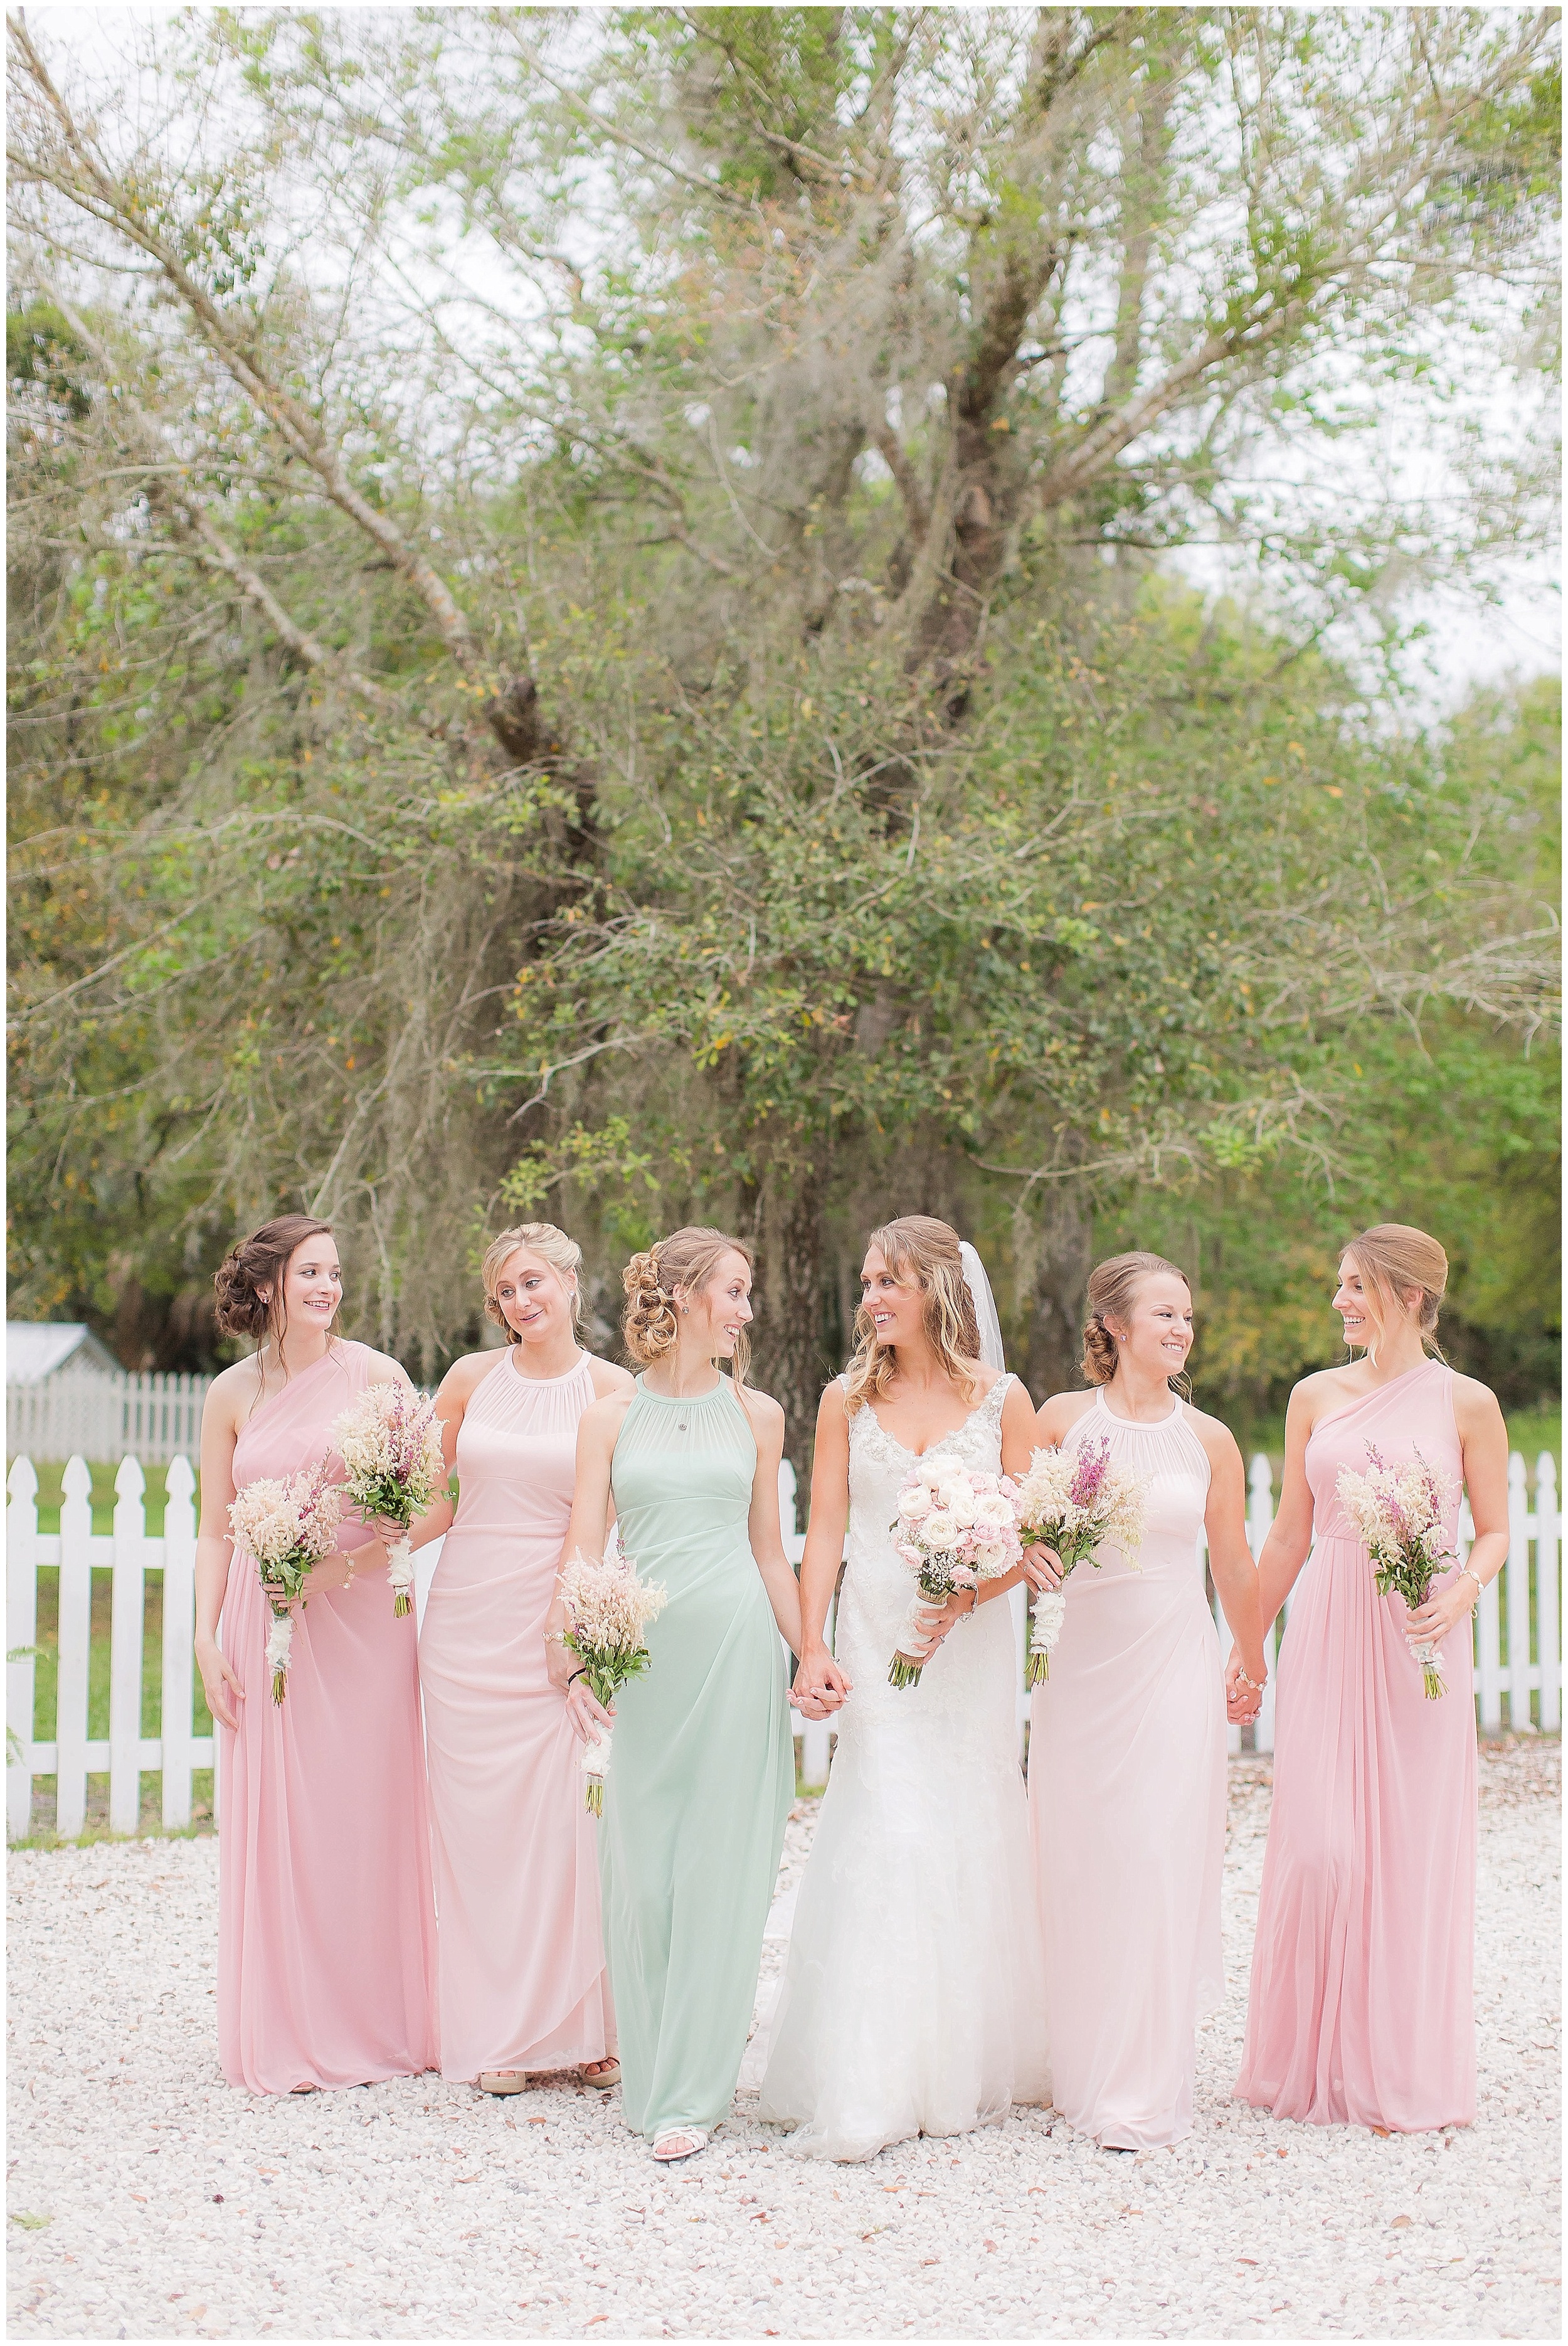 The Happy Just Married Bride with Her Bridal Party in Pink and Green Dresses. 